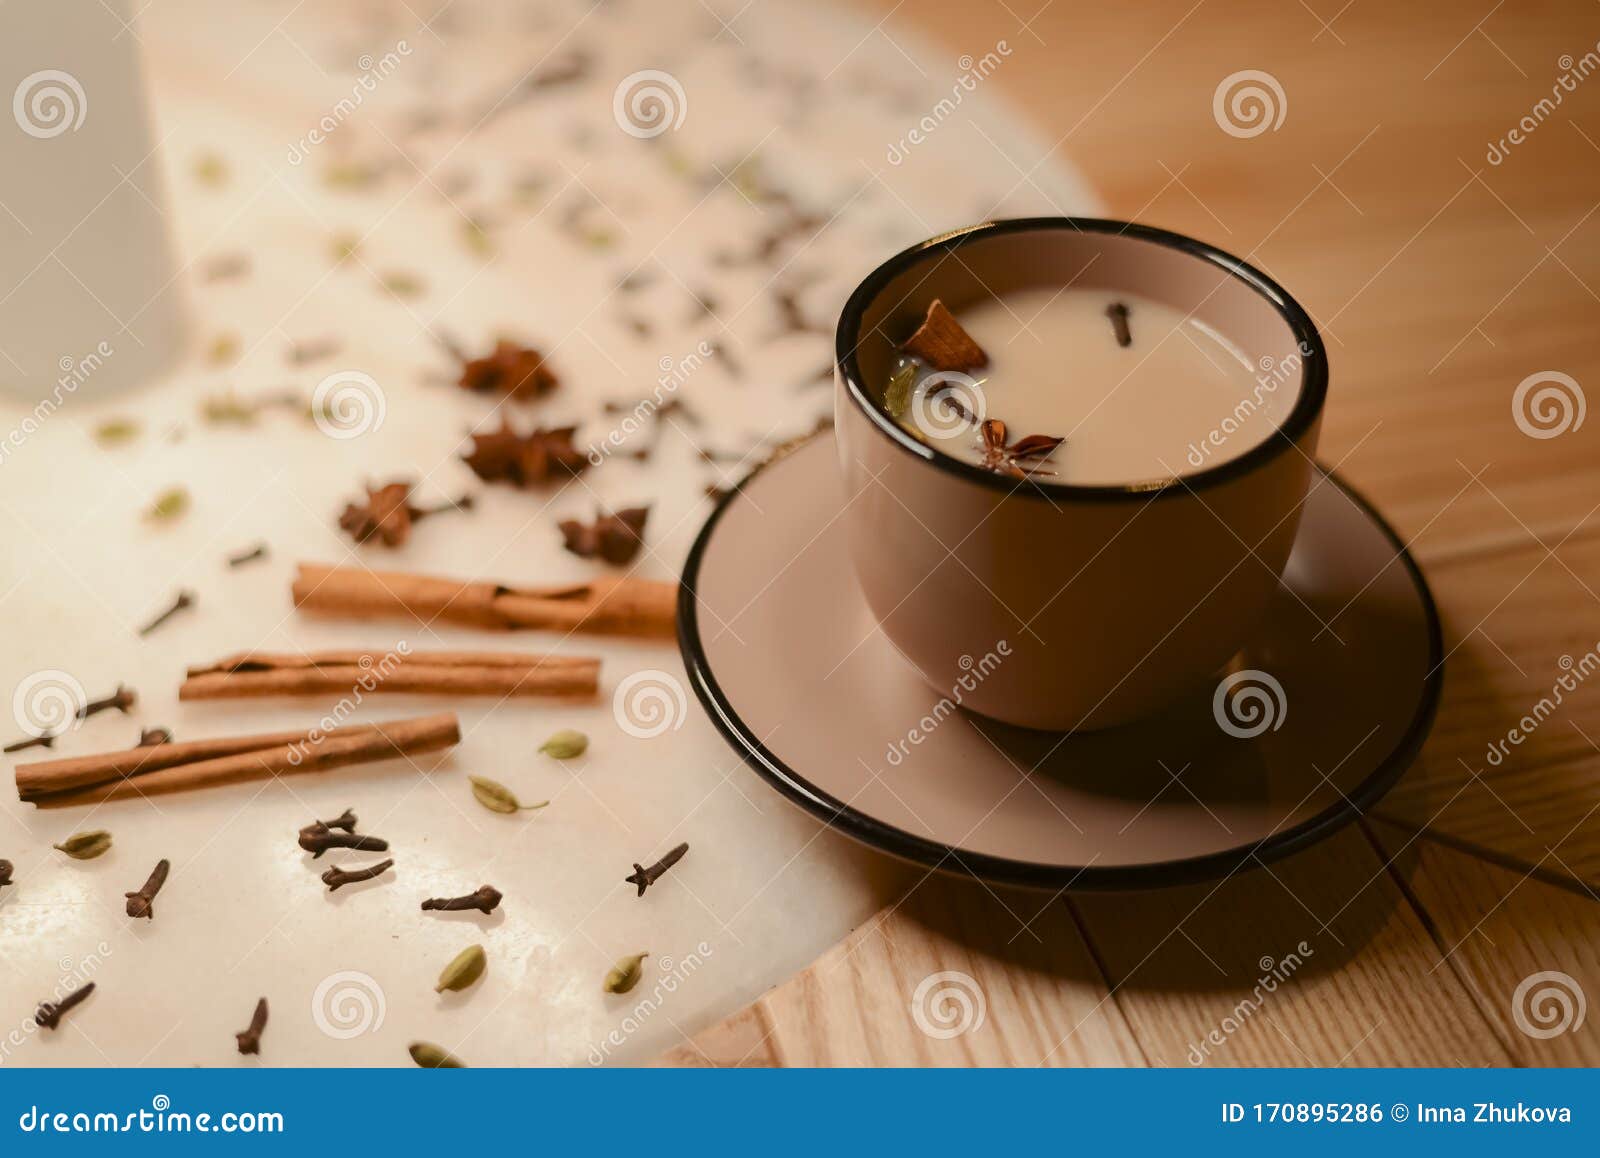 Brown Cup Of Coffee Latte Or Americano With Milk On Rustic Wooden Table With Sugar And Cinnamon And Anise Stock Photo Image Of Coffee Flavor 170895286,Orchid Flower Spike